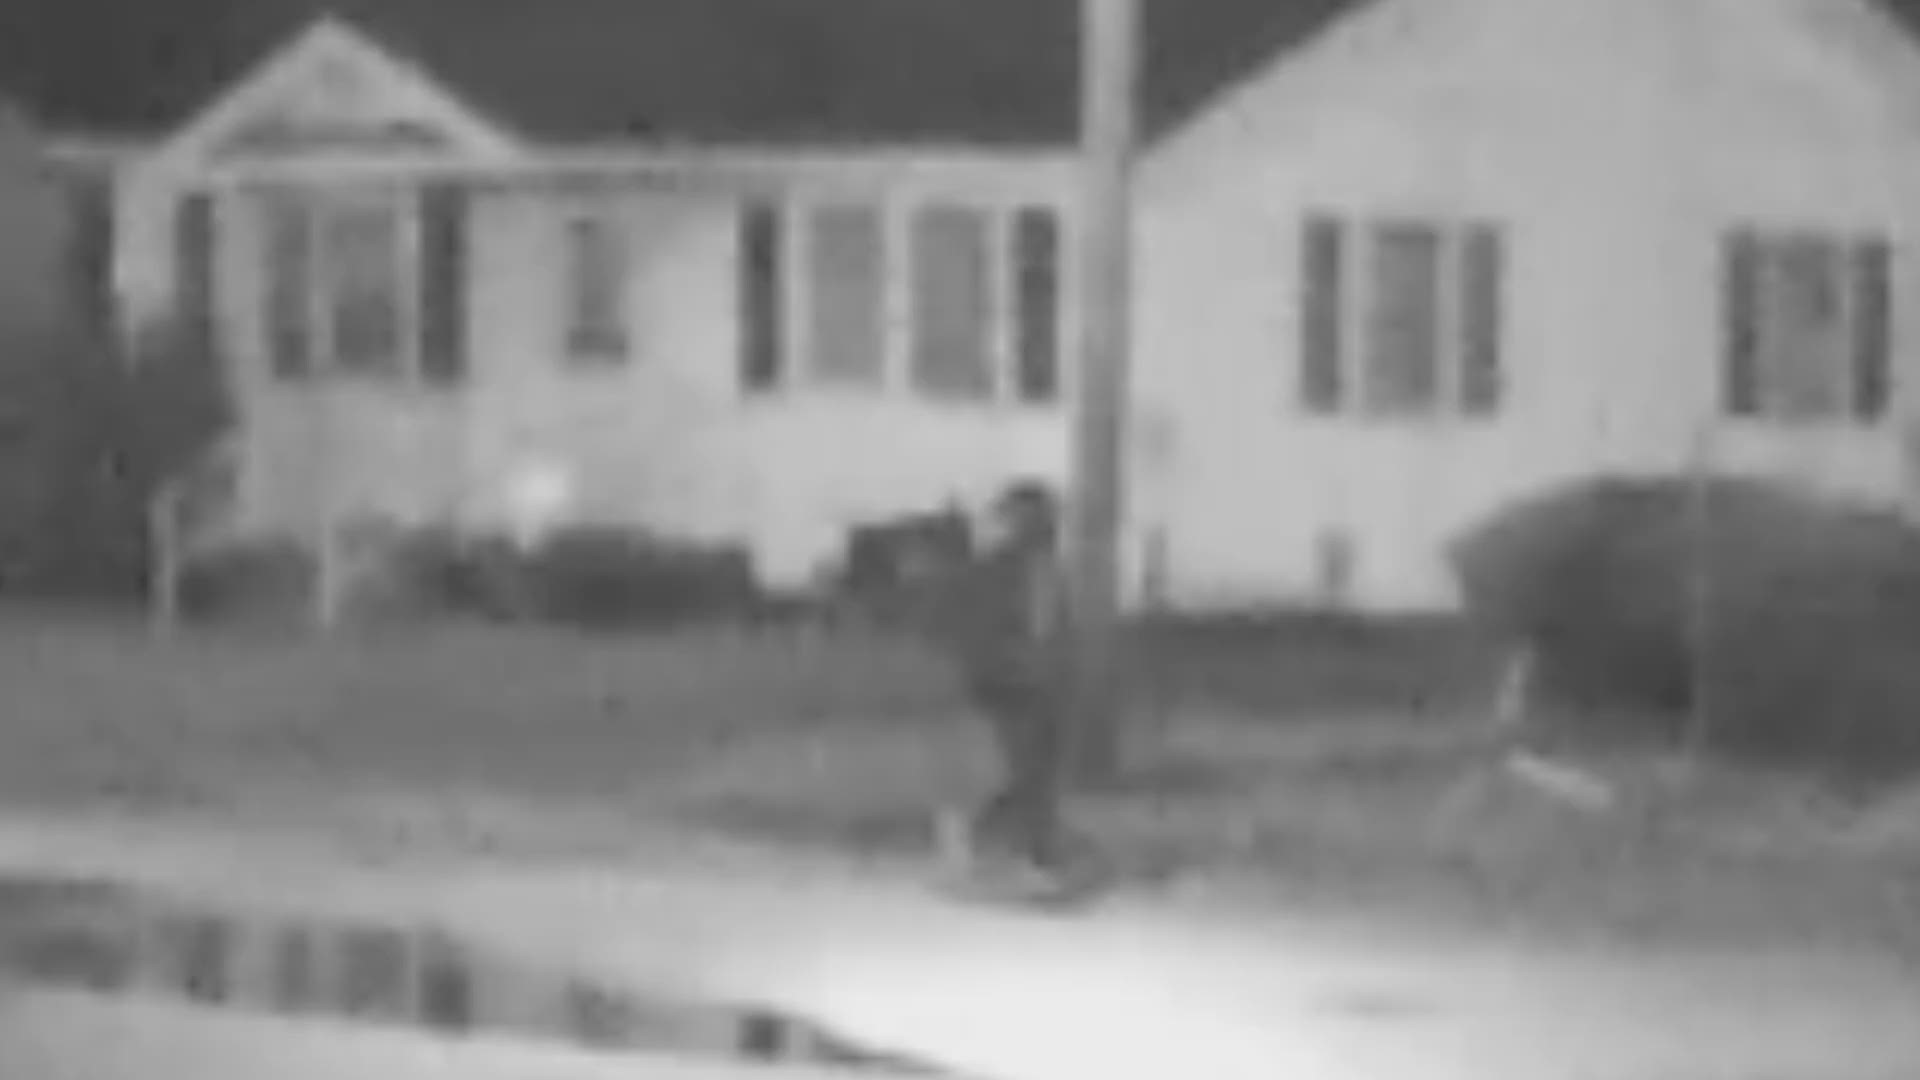 The video shows what appears to be a man wearing light colored shoes, a light-colored shirt, and a hoodie walking toward the Rosewood Mobile Home Park in Lumberton, N.C.